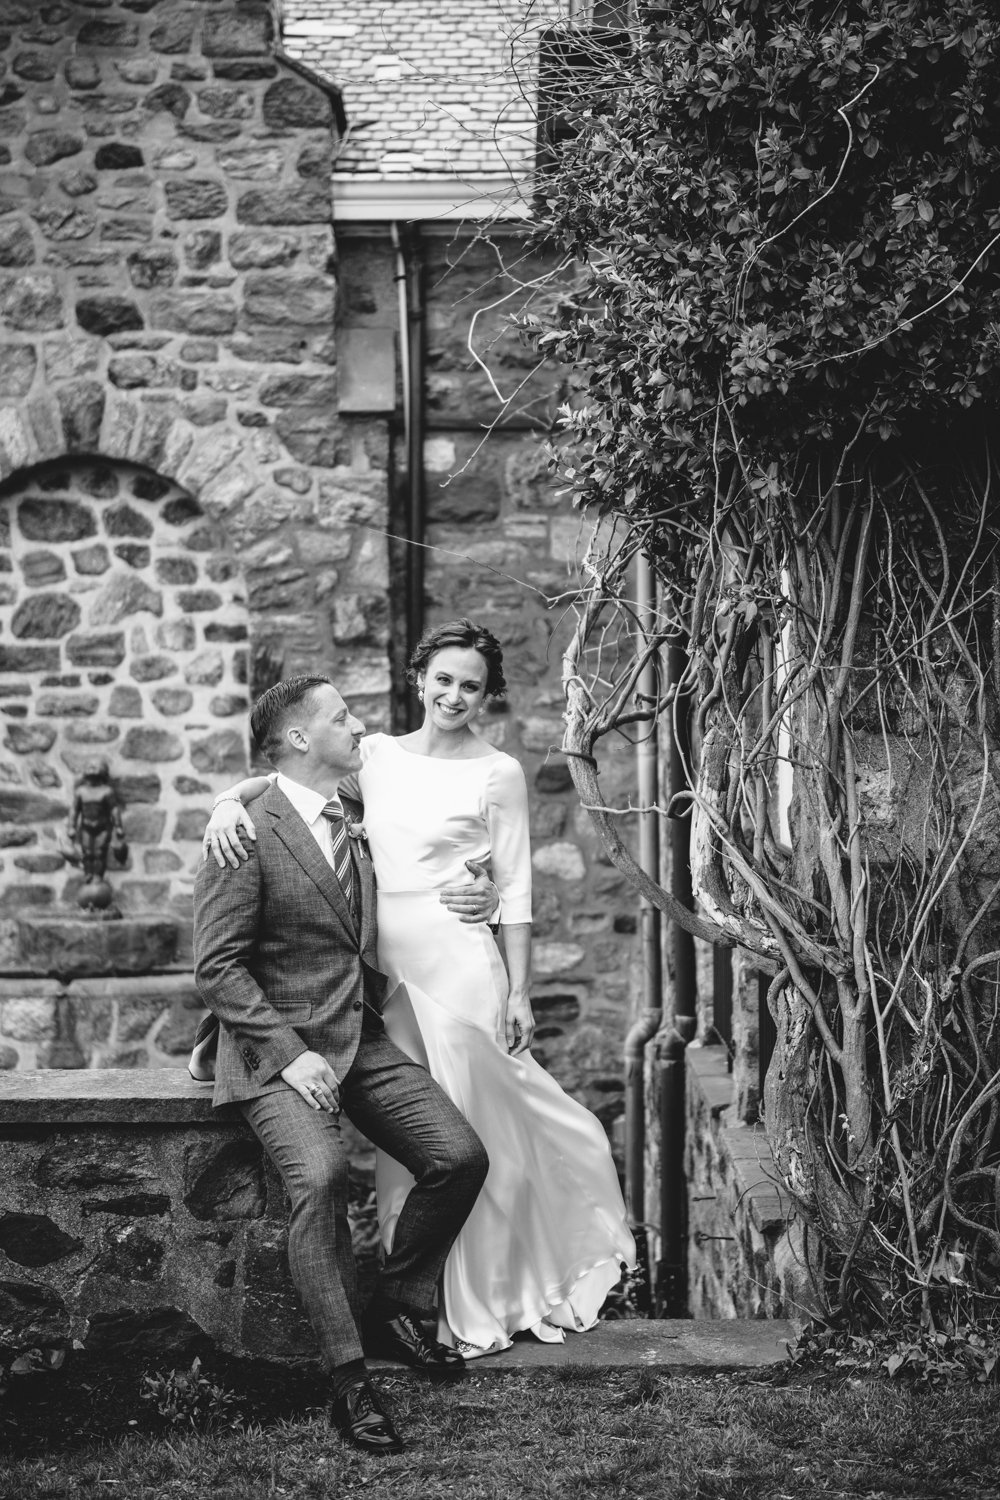 Groom sits on a stone wall and looks at his bride who is standing next to him. Their arms are around each other and she is smiling at the camera.

Upstate New York Wedding Photography. Cold Spring NY Wedding Photography. Luxury Local Wedding Photographer. Destination Wedding Photographer.